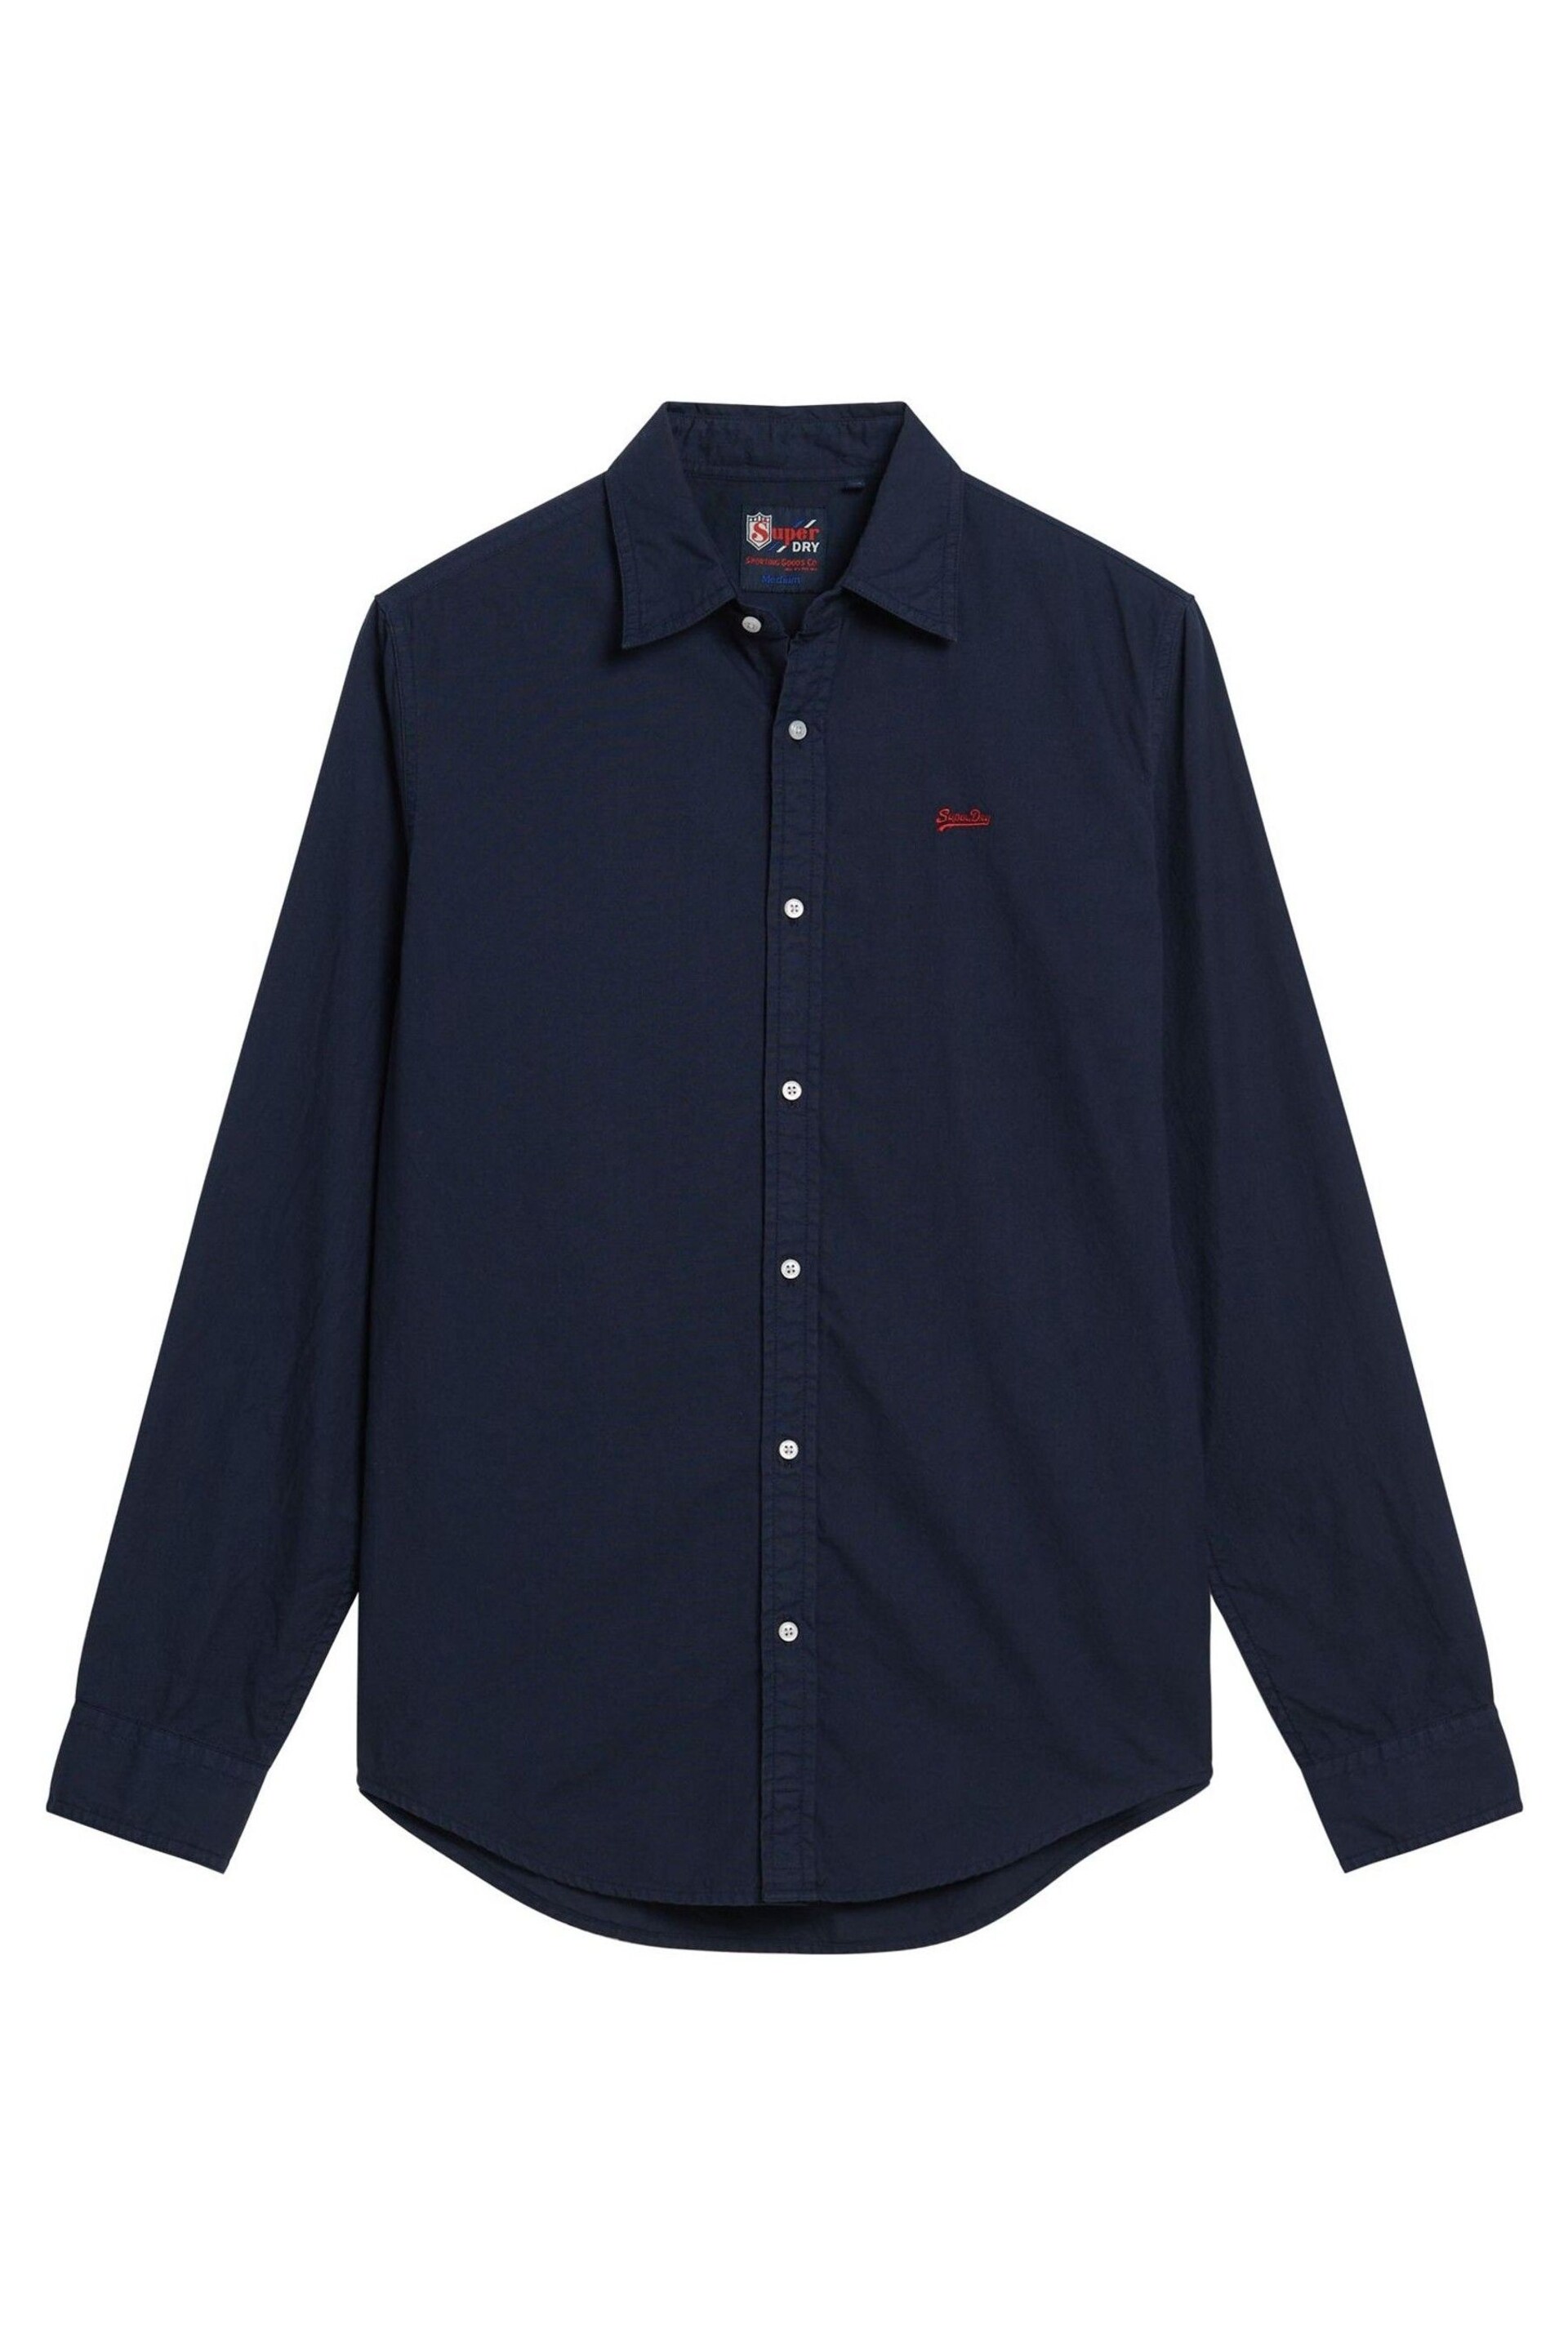 Superdry Blue Overdyed Cotton Long Sleeved Shirt - Image 4 of 6